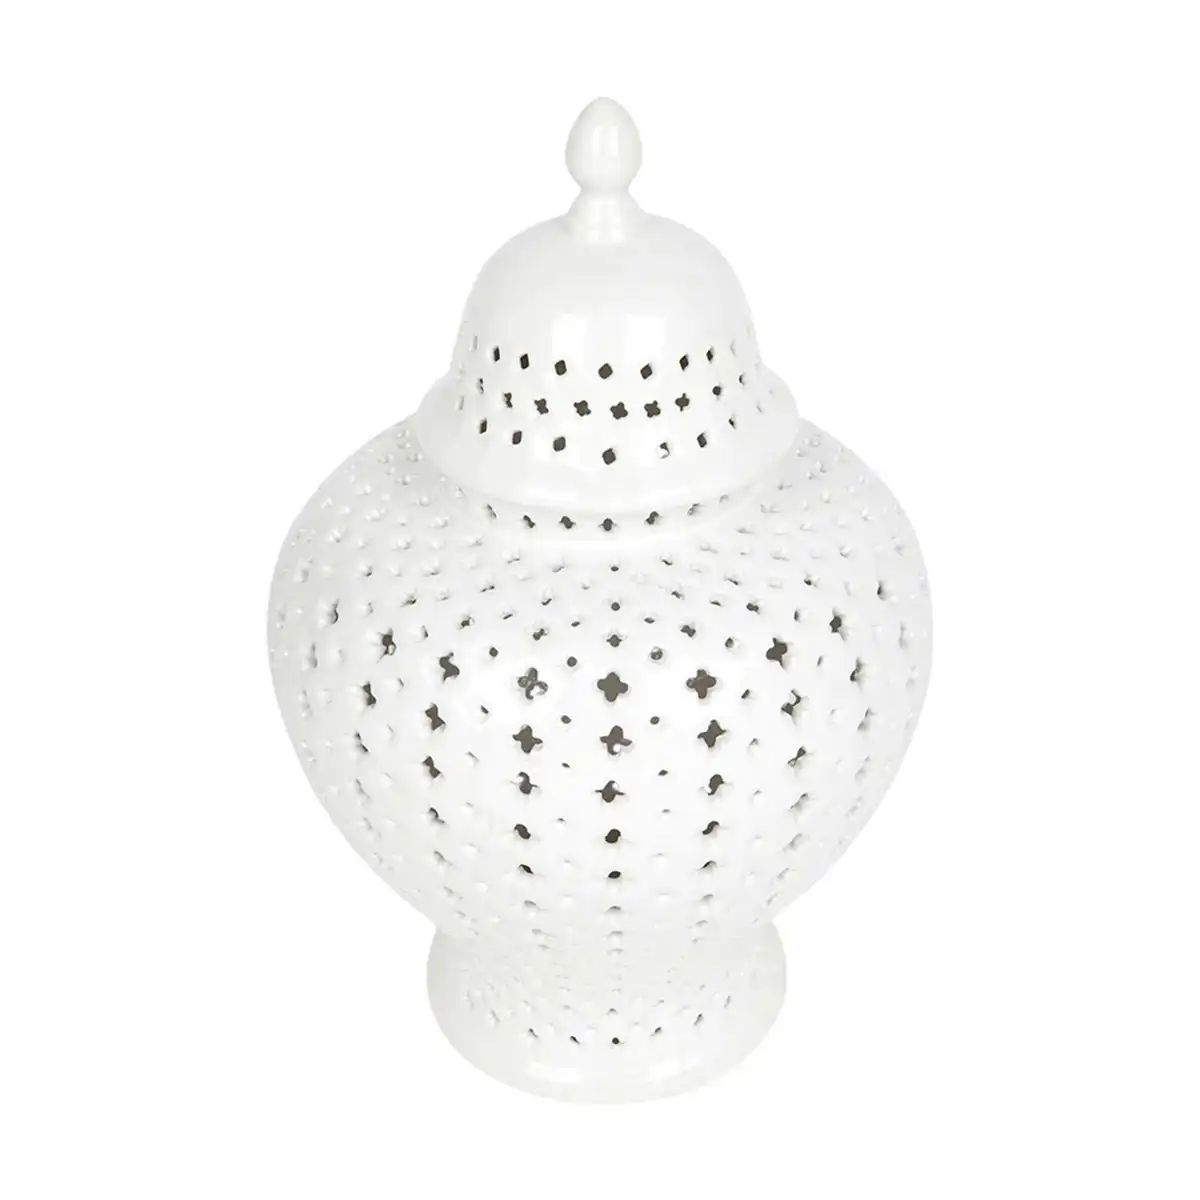 Minx Temple Jar - Small White - OUTLET NSW & VIC & QLD